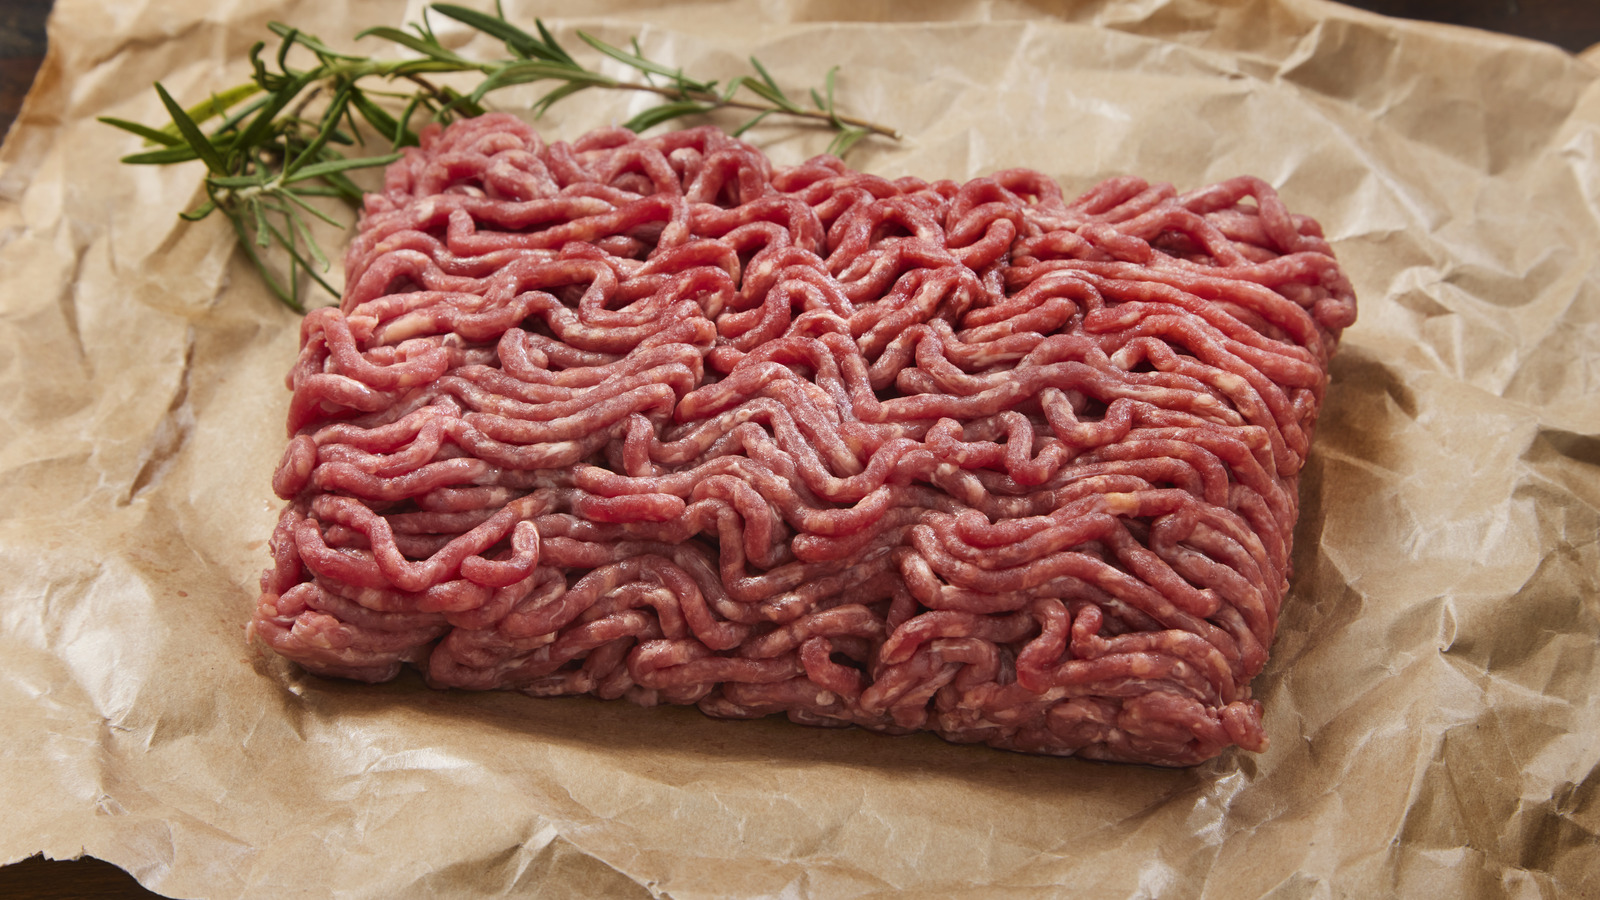 https://www.thedailymeal.com/img/gallery/15-ground-beef-cooking-tips-youll-wish-you-knew-sooner/l-intro-1691696618.jpg